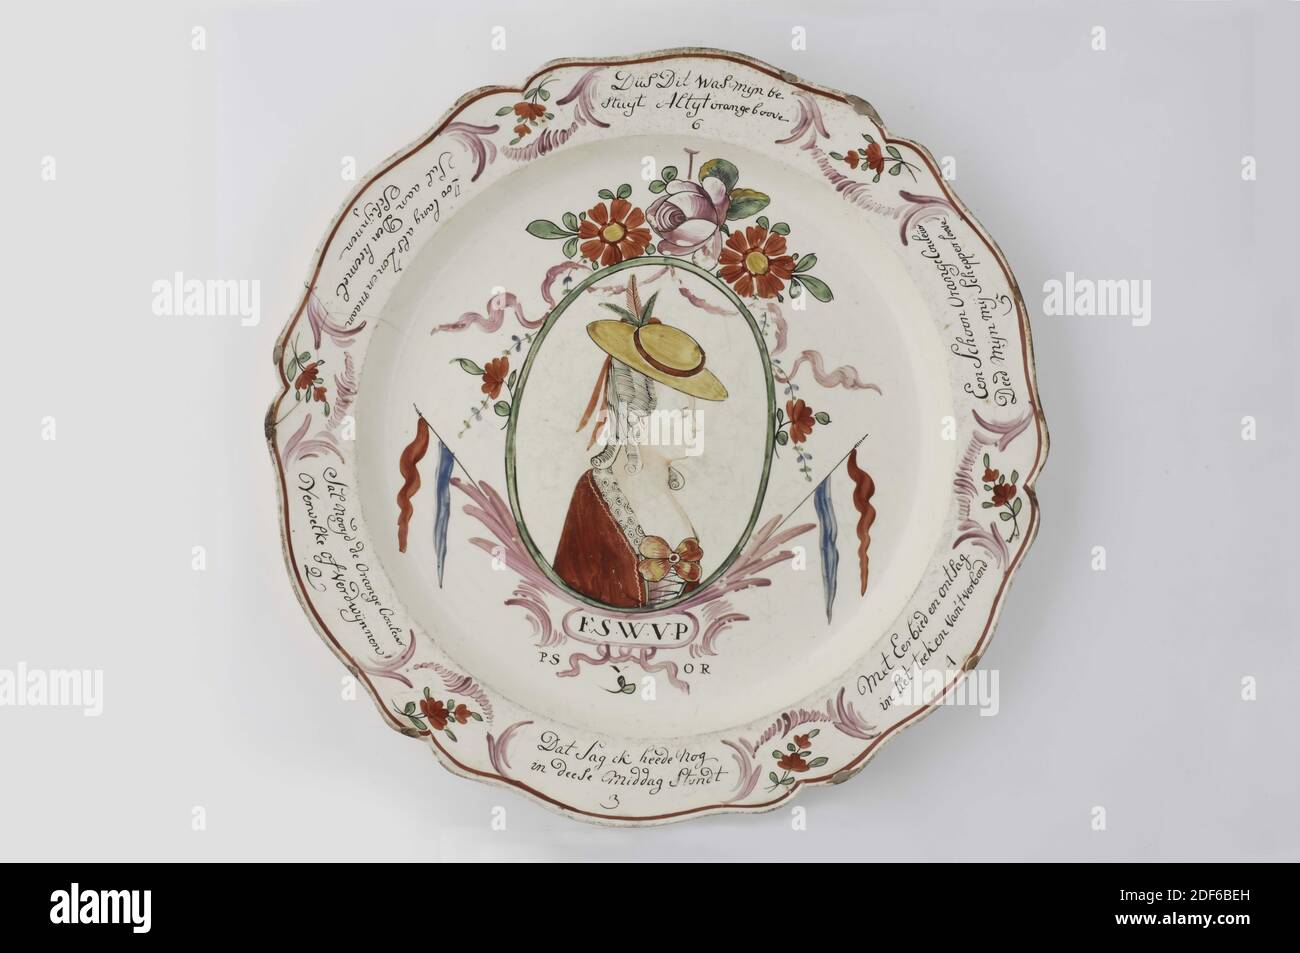 plate (crockery), Anonymous, c. 1790, glaze, earthenware, General: 39.5 x 4.1cm (395 x 41mm), Dish of English creamware with a flat bottom, a hollow wall and a scalloped, protruding rim. Decorated in the center with a portrait of Wilhelmina of Prussia in an oval medallion with a Dutch flag on both sides and a floral top with ribbon on top. Under the portrait the inscription F.S.W.V.P PS V OR. On the rim six verses of a verse in black writing, separated by a simple floral pattern: As long as Sun and Moon | Sal in the sky Shine 1, Sal nooyd de Orange Couleur | Fade or disappear 2, That Sag I had Stock Photo